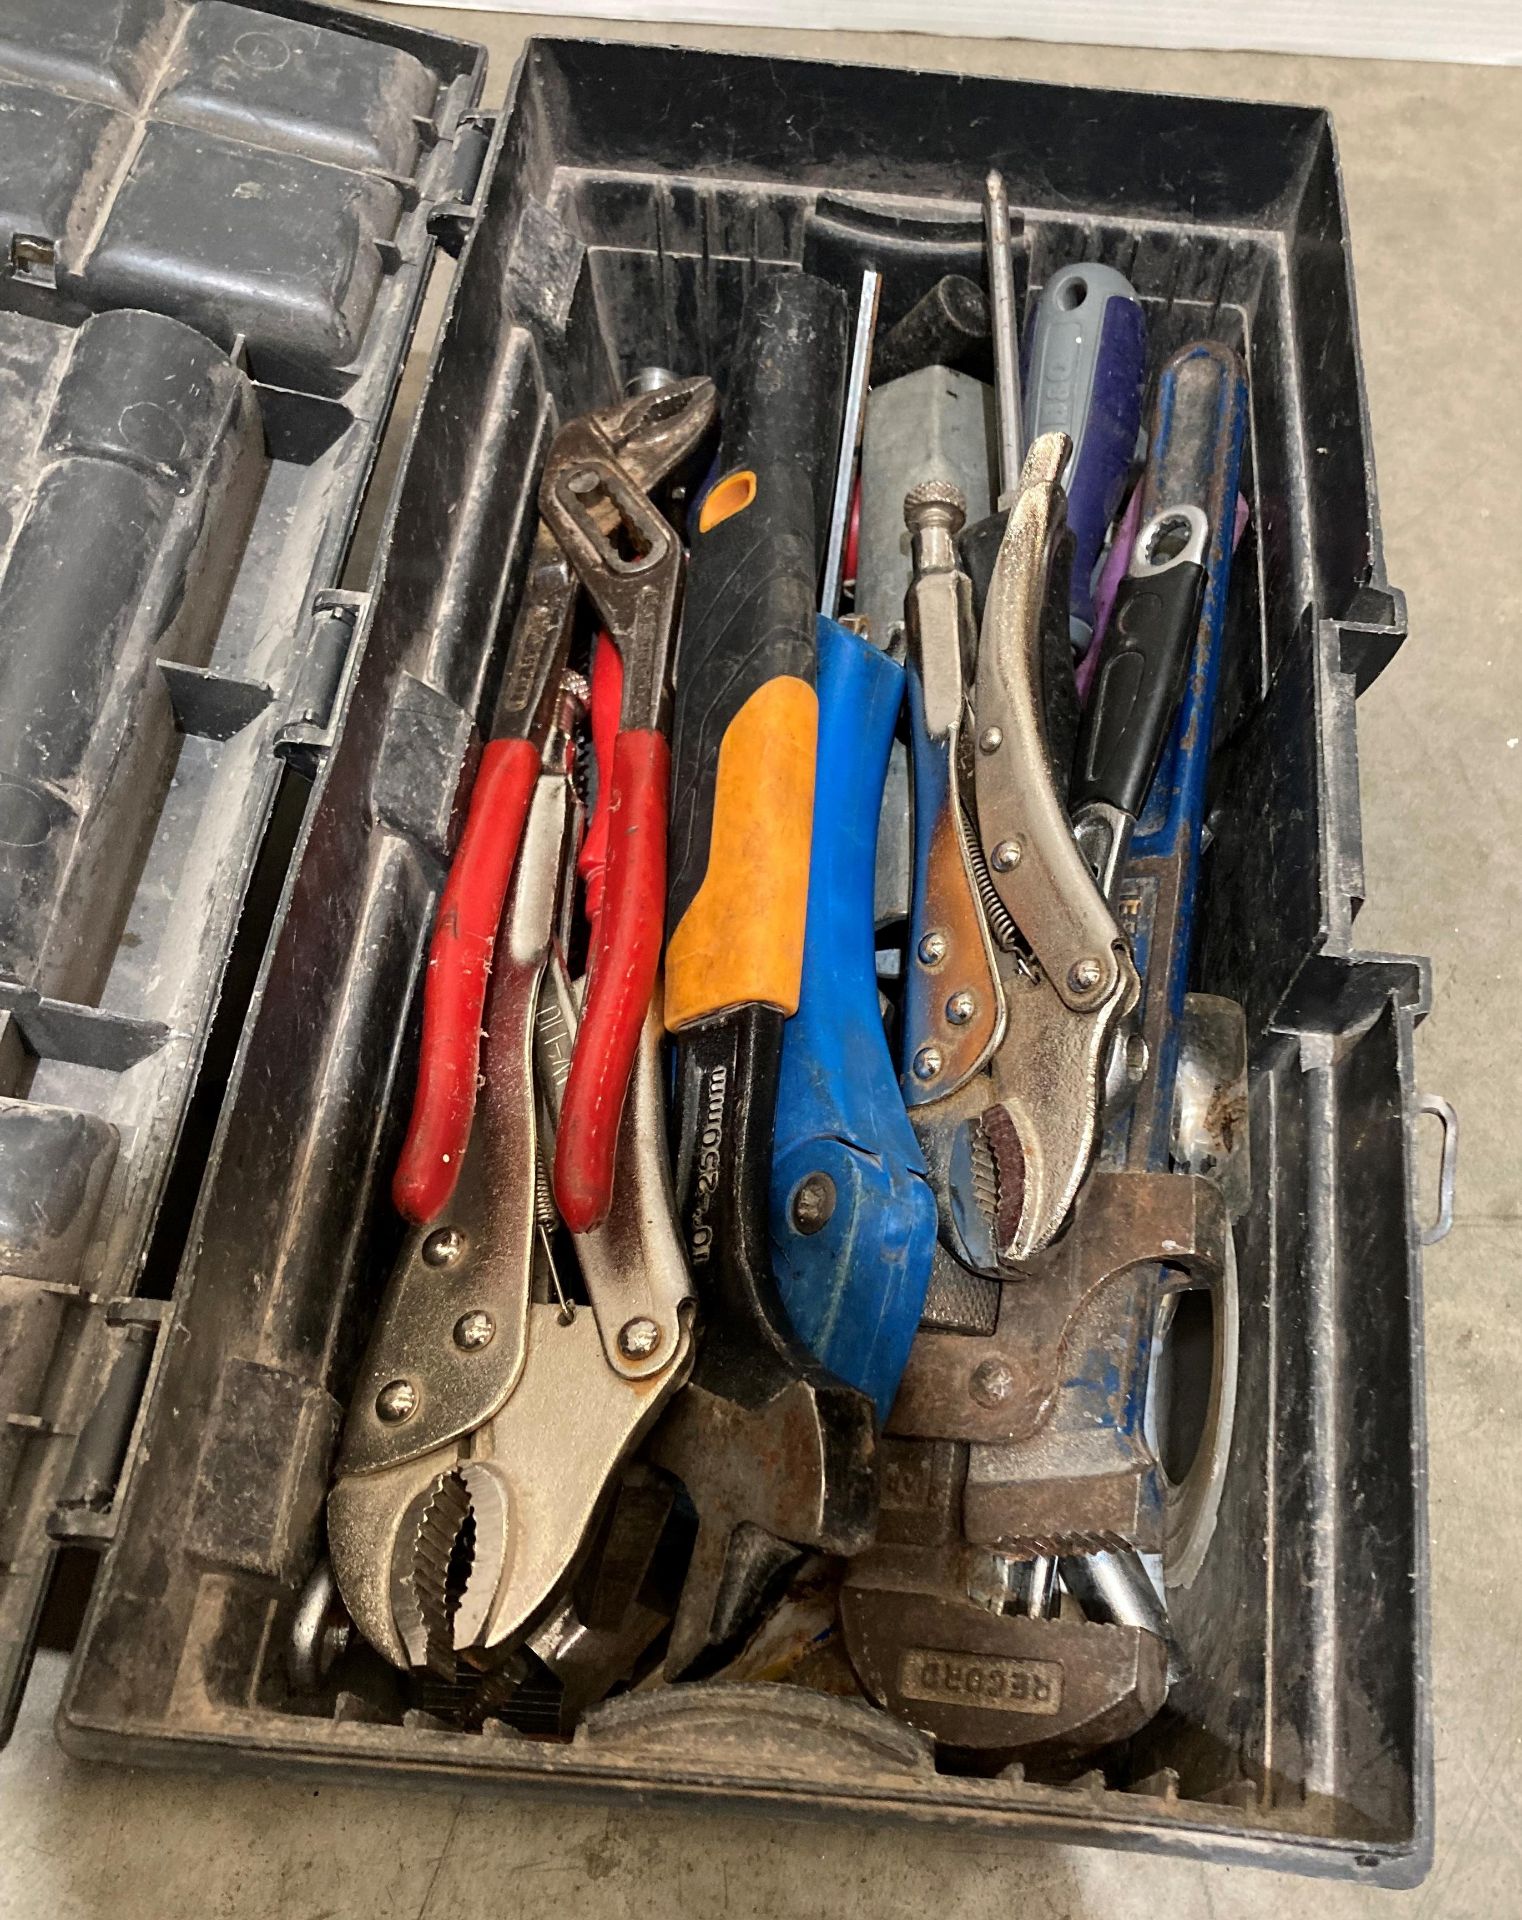 3 x assorted tool boxes and contents - assorted hand tools, spanners, screwdrivers, pliers, - Image 3 of 4